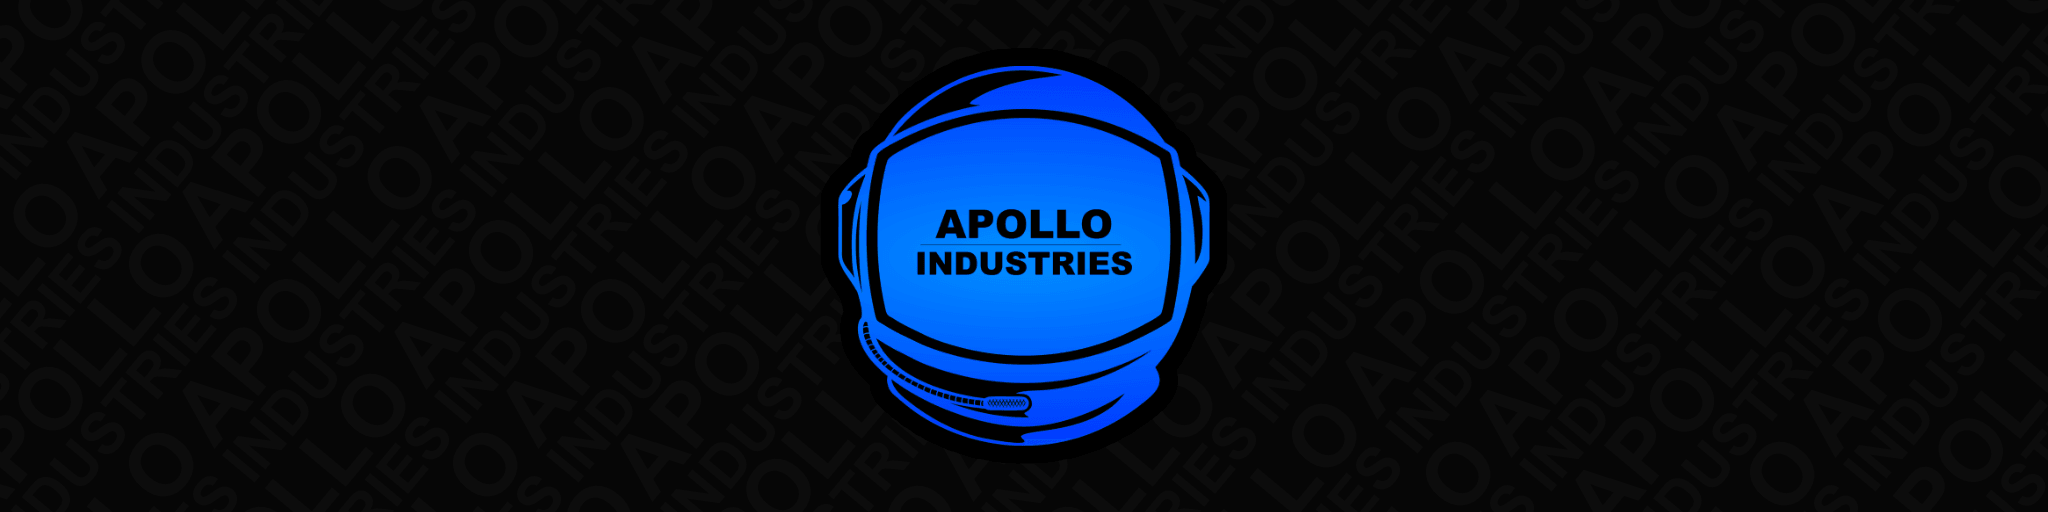 Home page - Apollo Industries llc